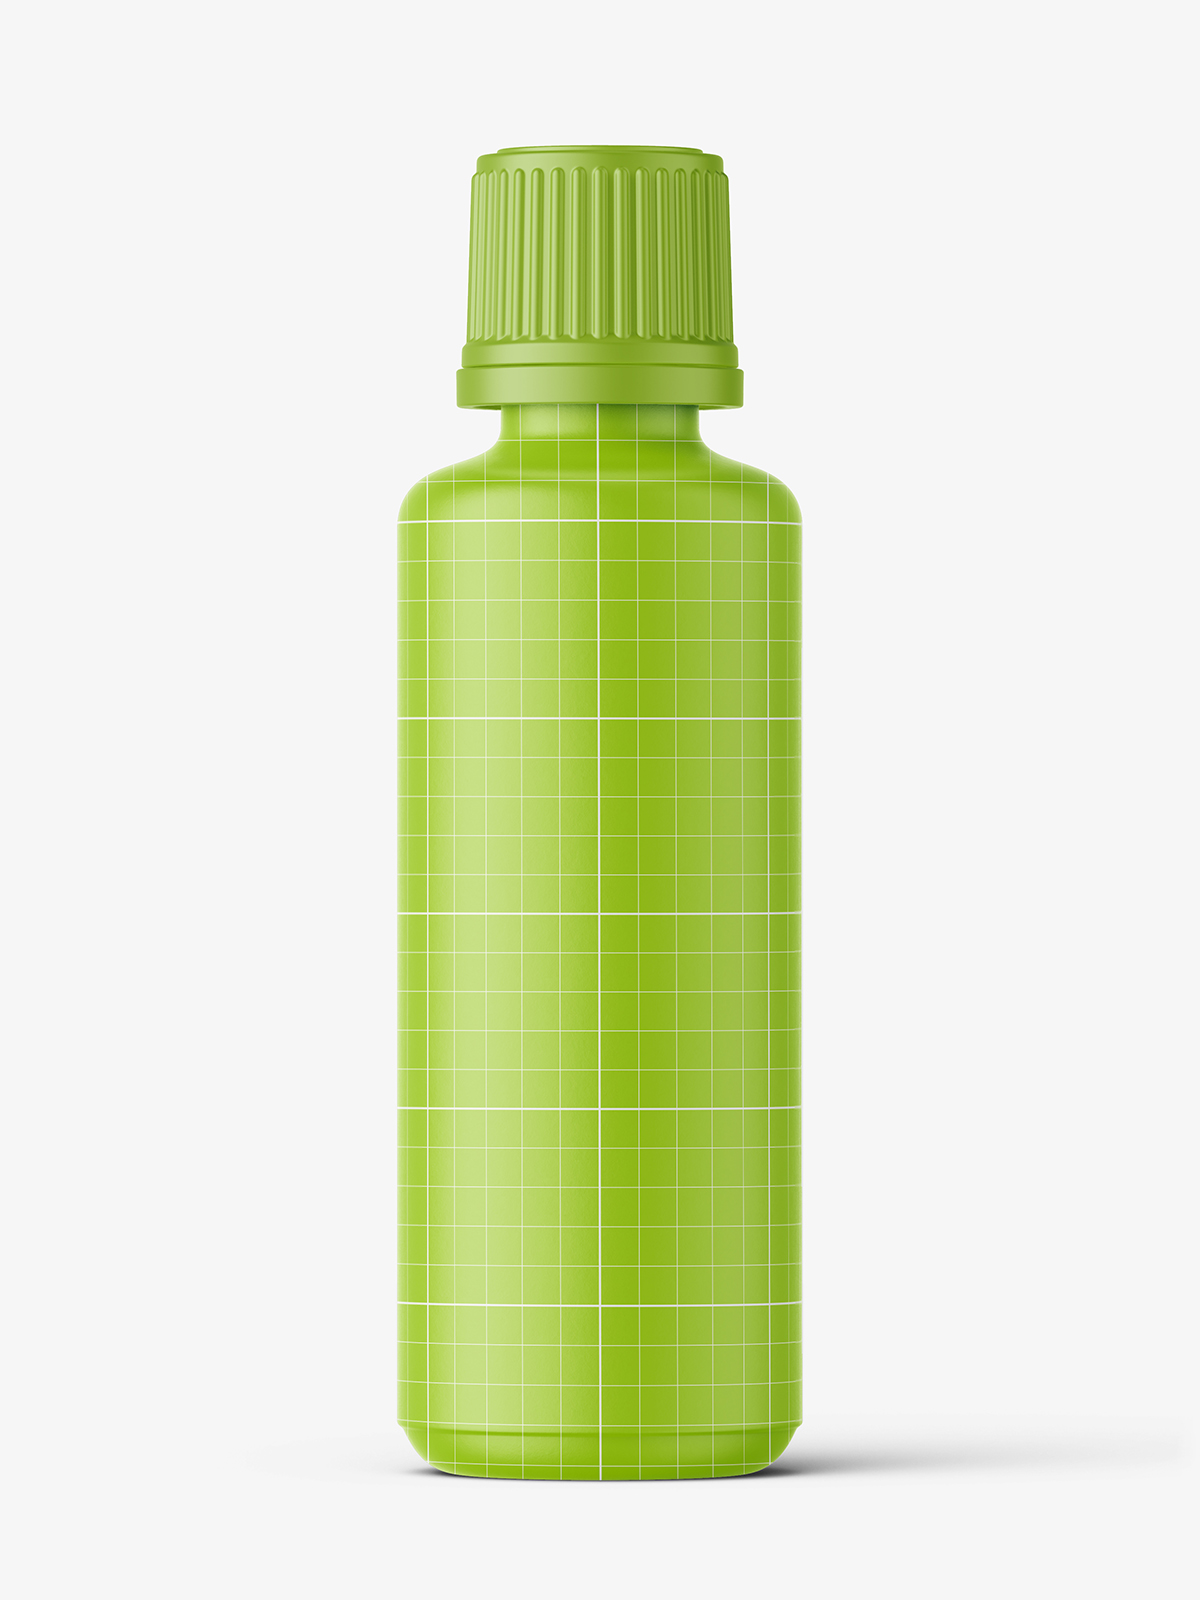 Download Clear Bottle With Pills Mockup 50 Ml Smarty Mockups